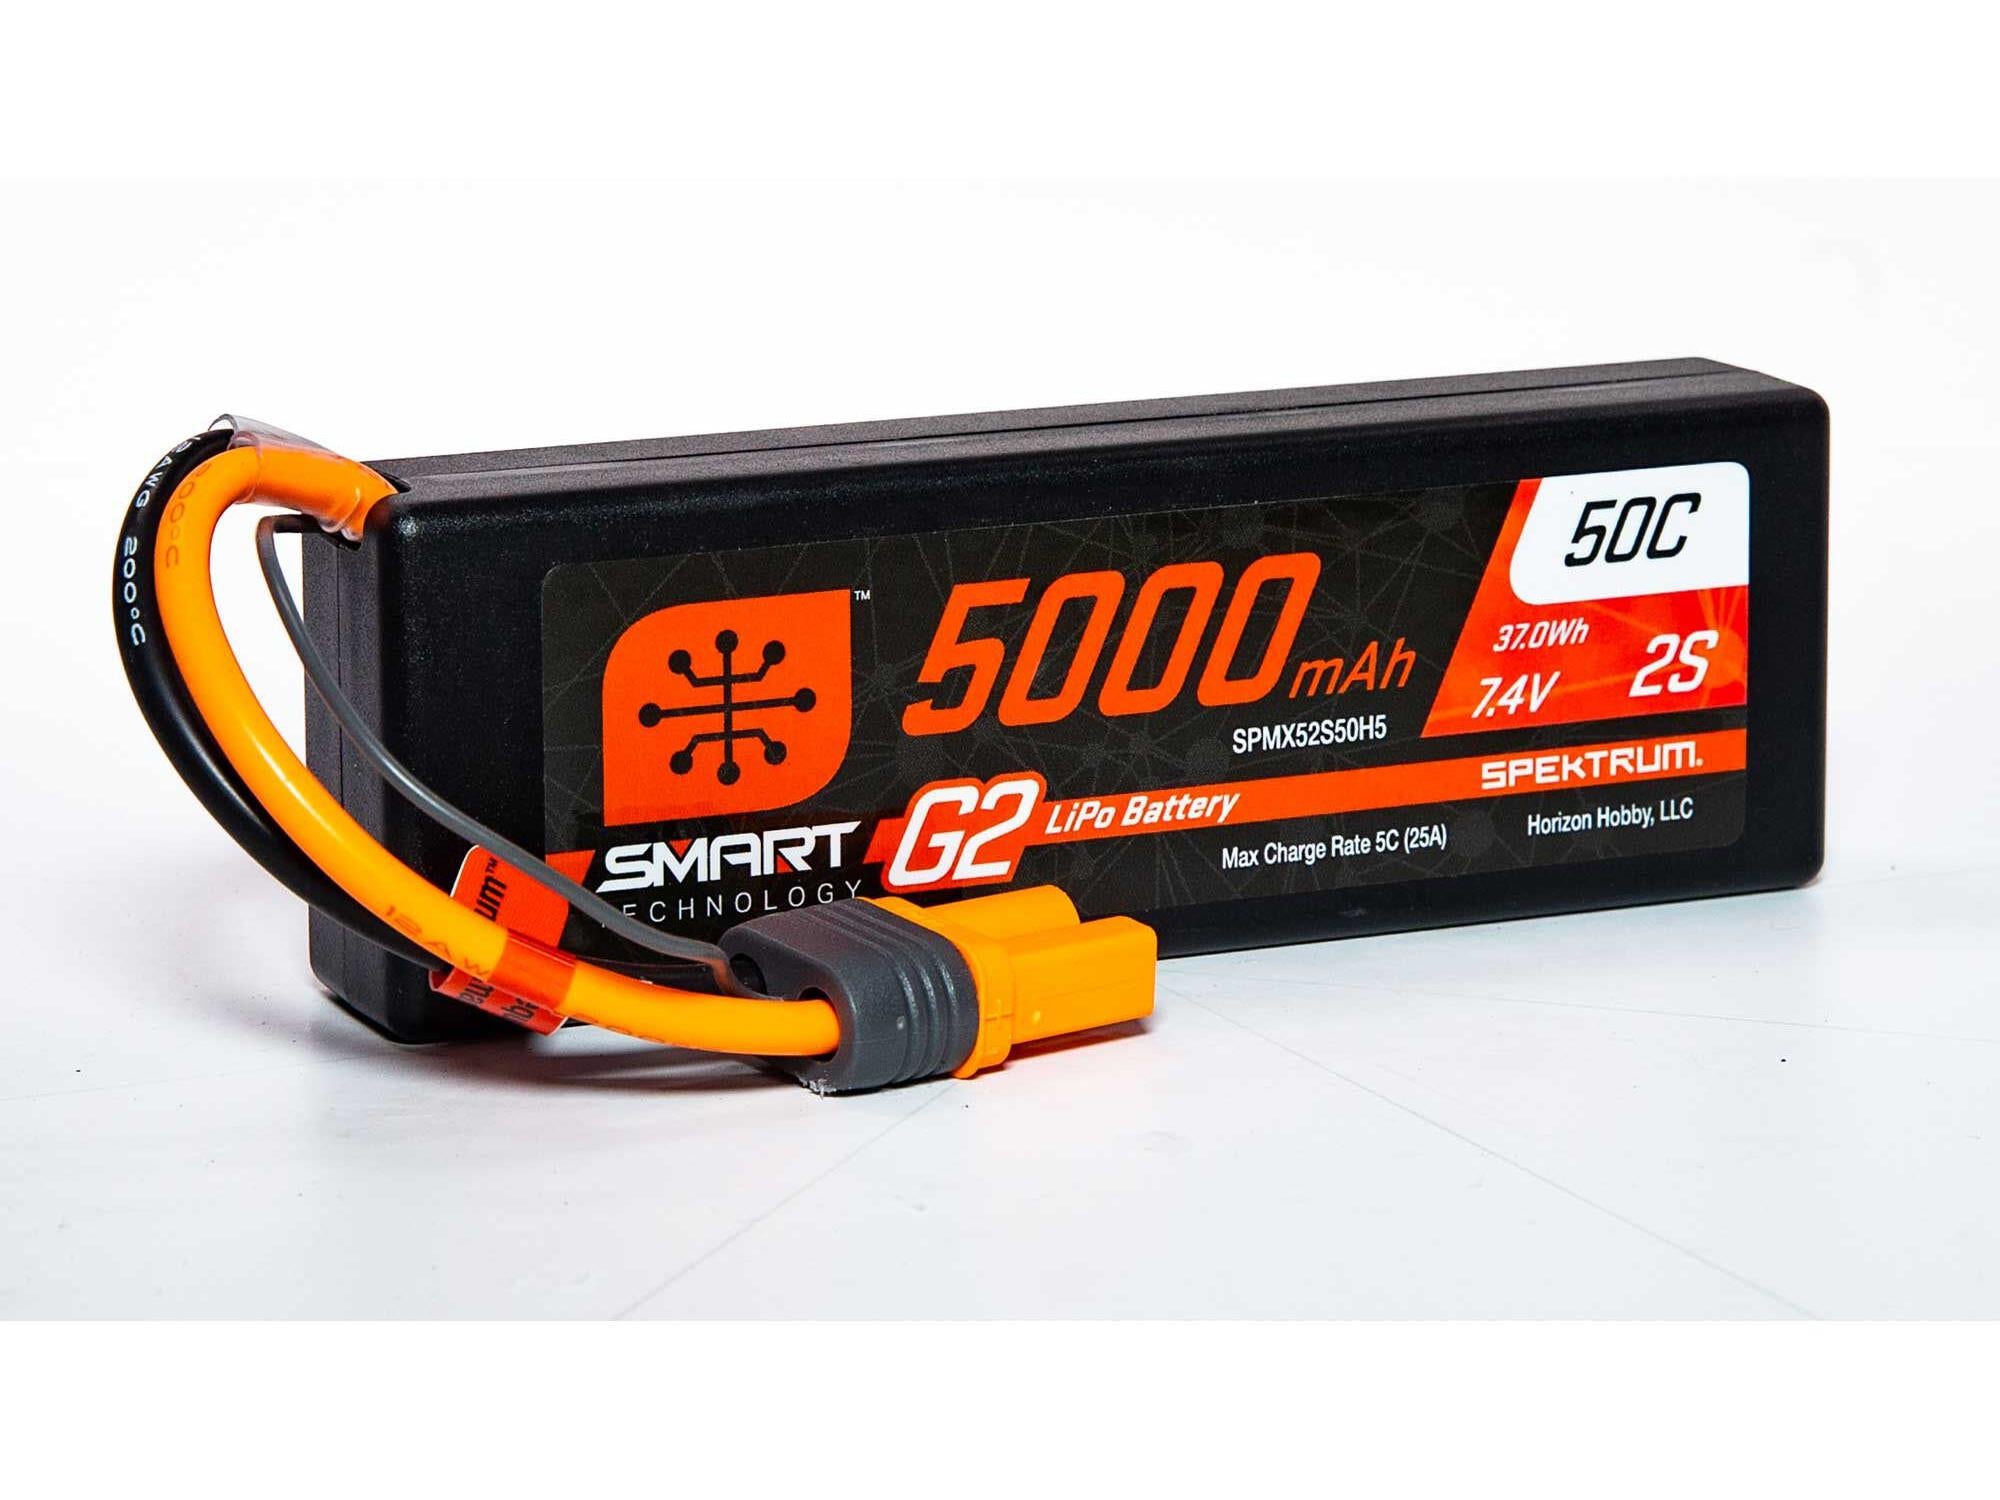 5000mAh 2S 7.4V SMART G2 50C LiPo Battery with IC5 Connector